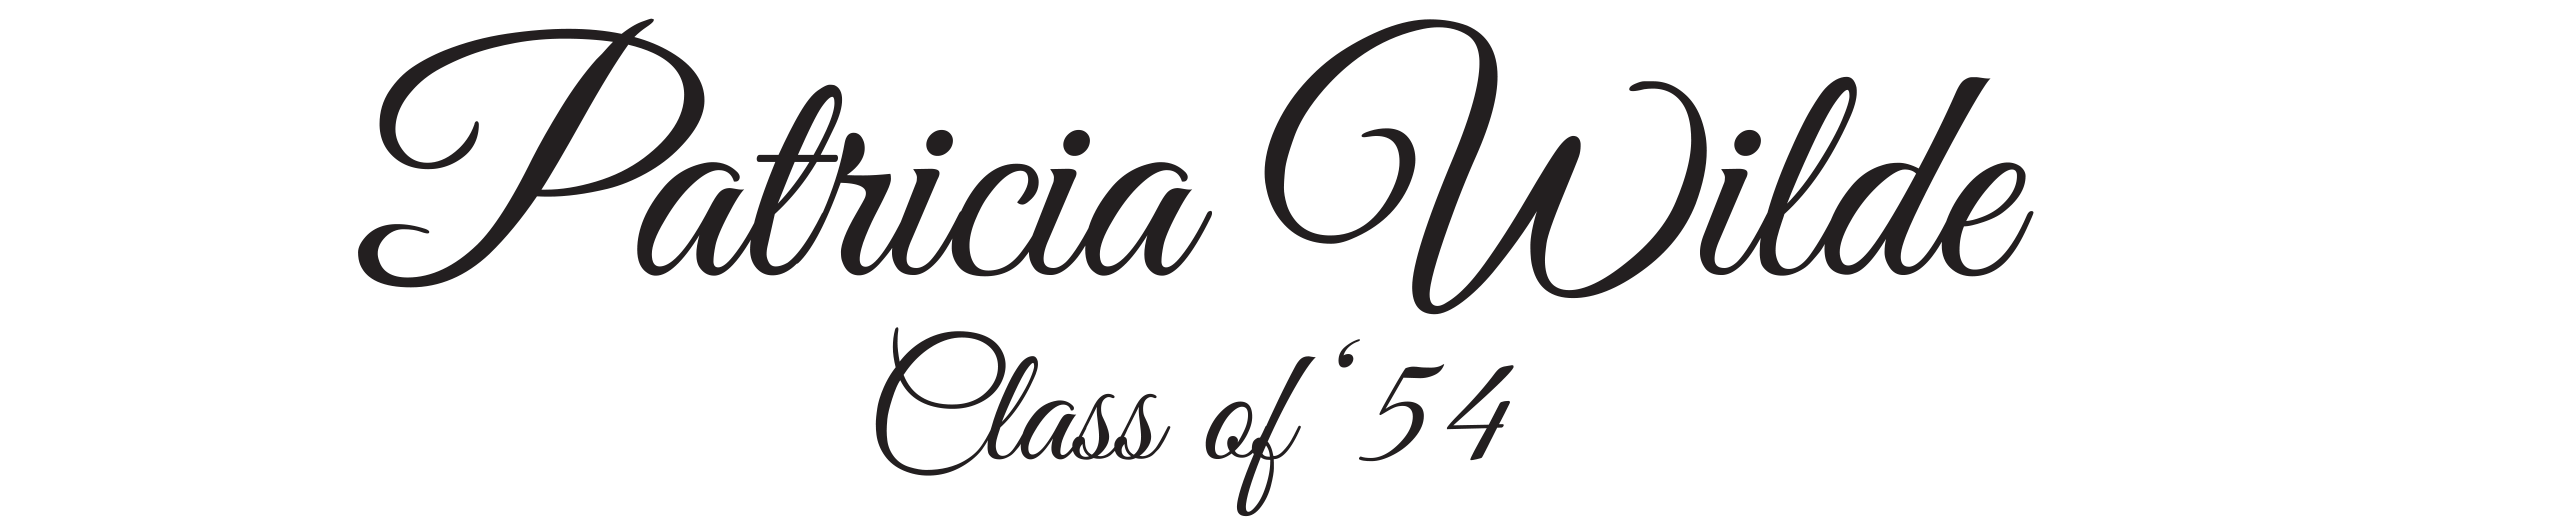 Patricia Wilde and the class of '54